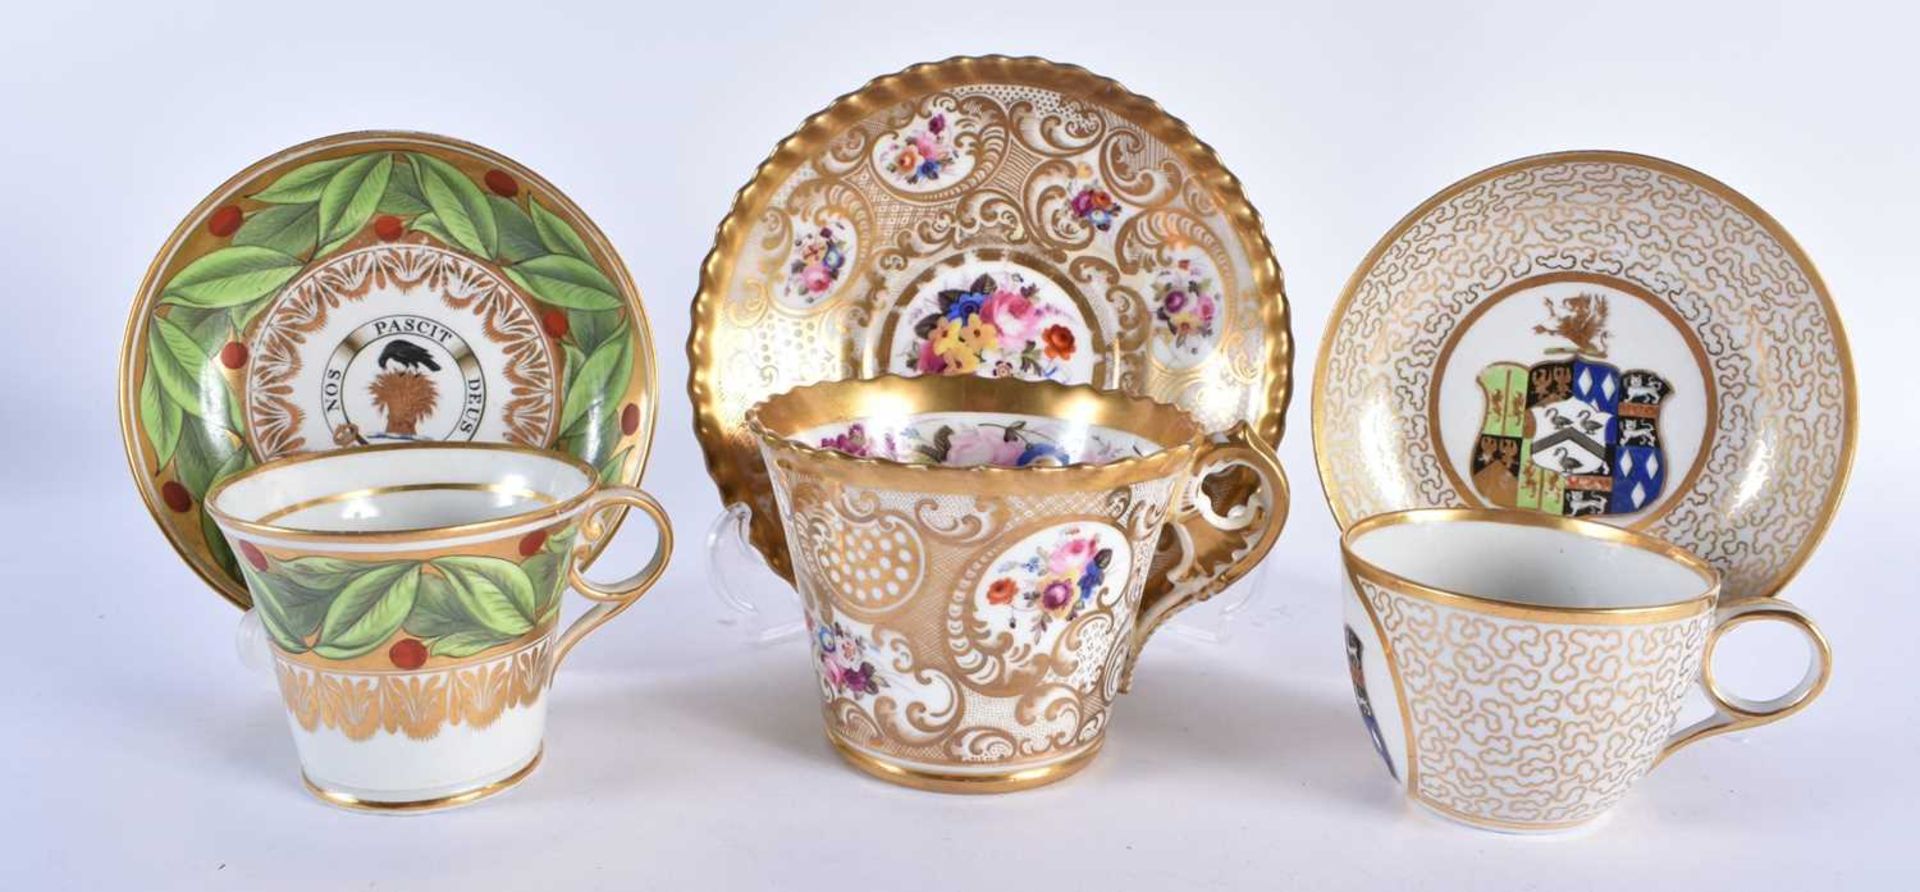 THREE EARLY 19TH CENTURY CHAMBERLAINS WORCESTER PORCELAIN CUPS AND SAUCERS painted with armorials